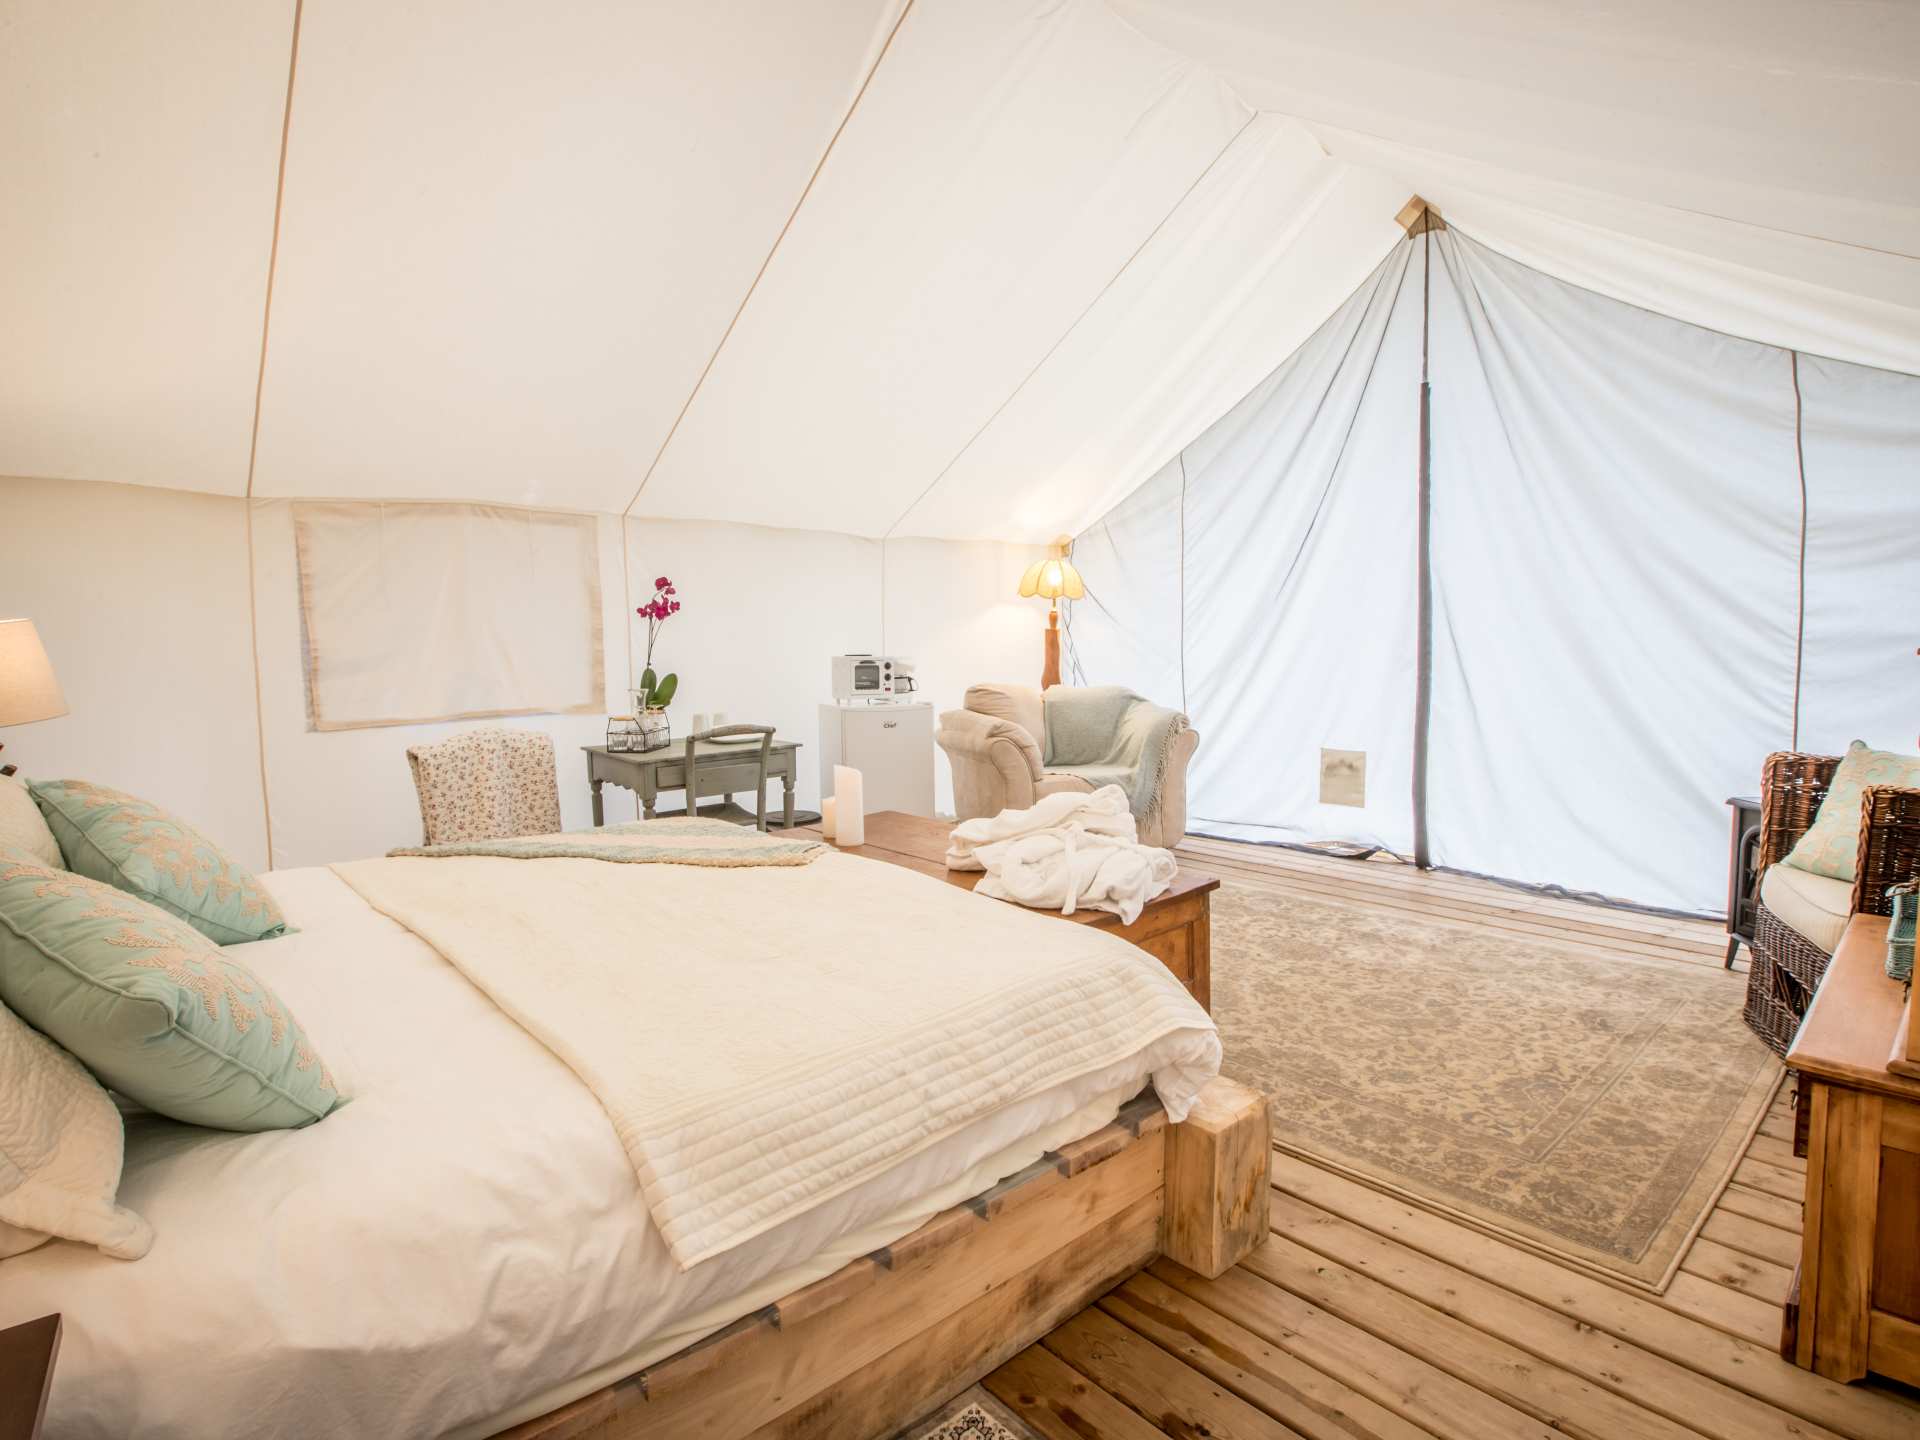 Ontario wellness retreats | A bed, pillows and tables in a tent at Whispering Springs Ontario wellness retreat